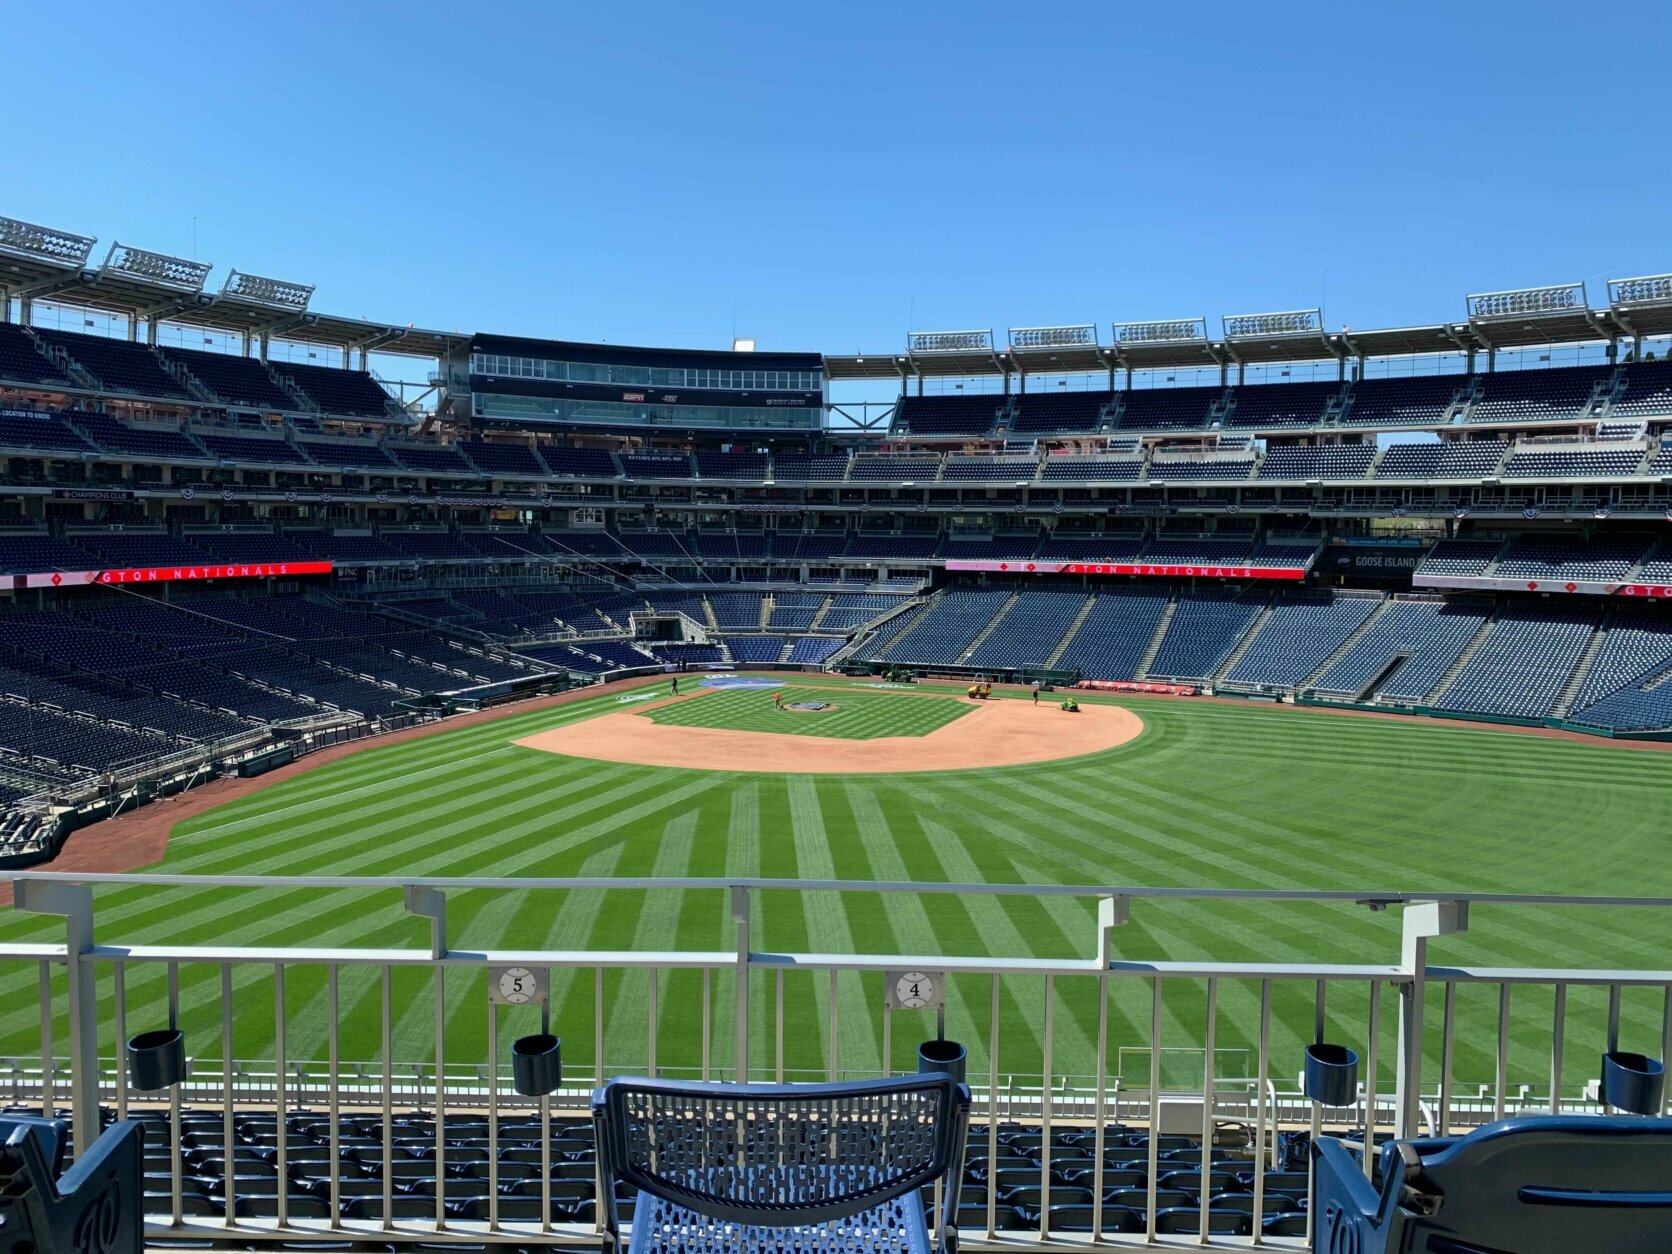 Giveaways, updated merch, and new food coming to Nats Park